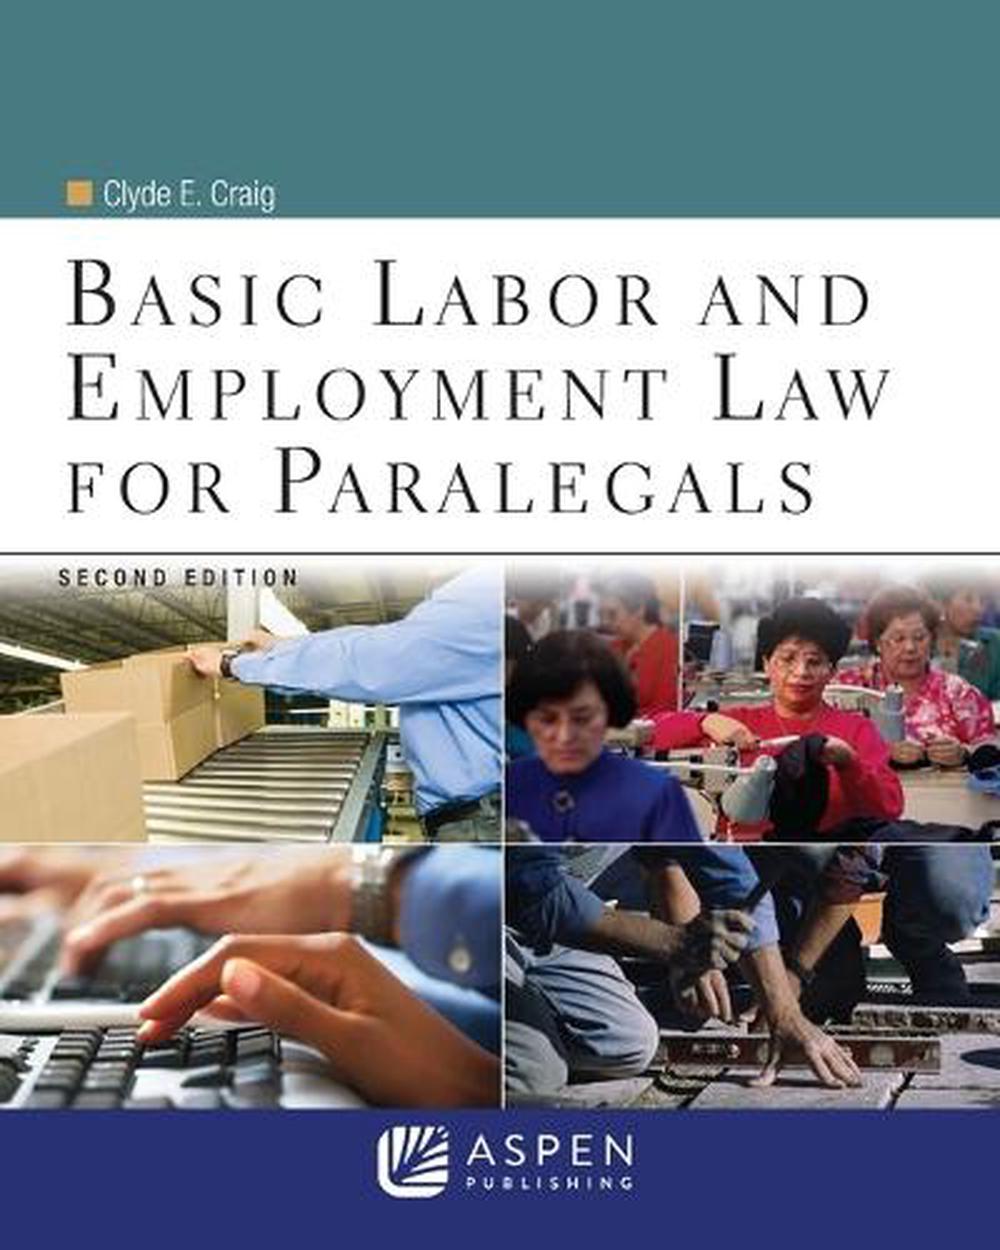 Basic Labor and Employment Law for Paralegals, Second Edition by Clyde